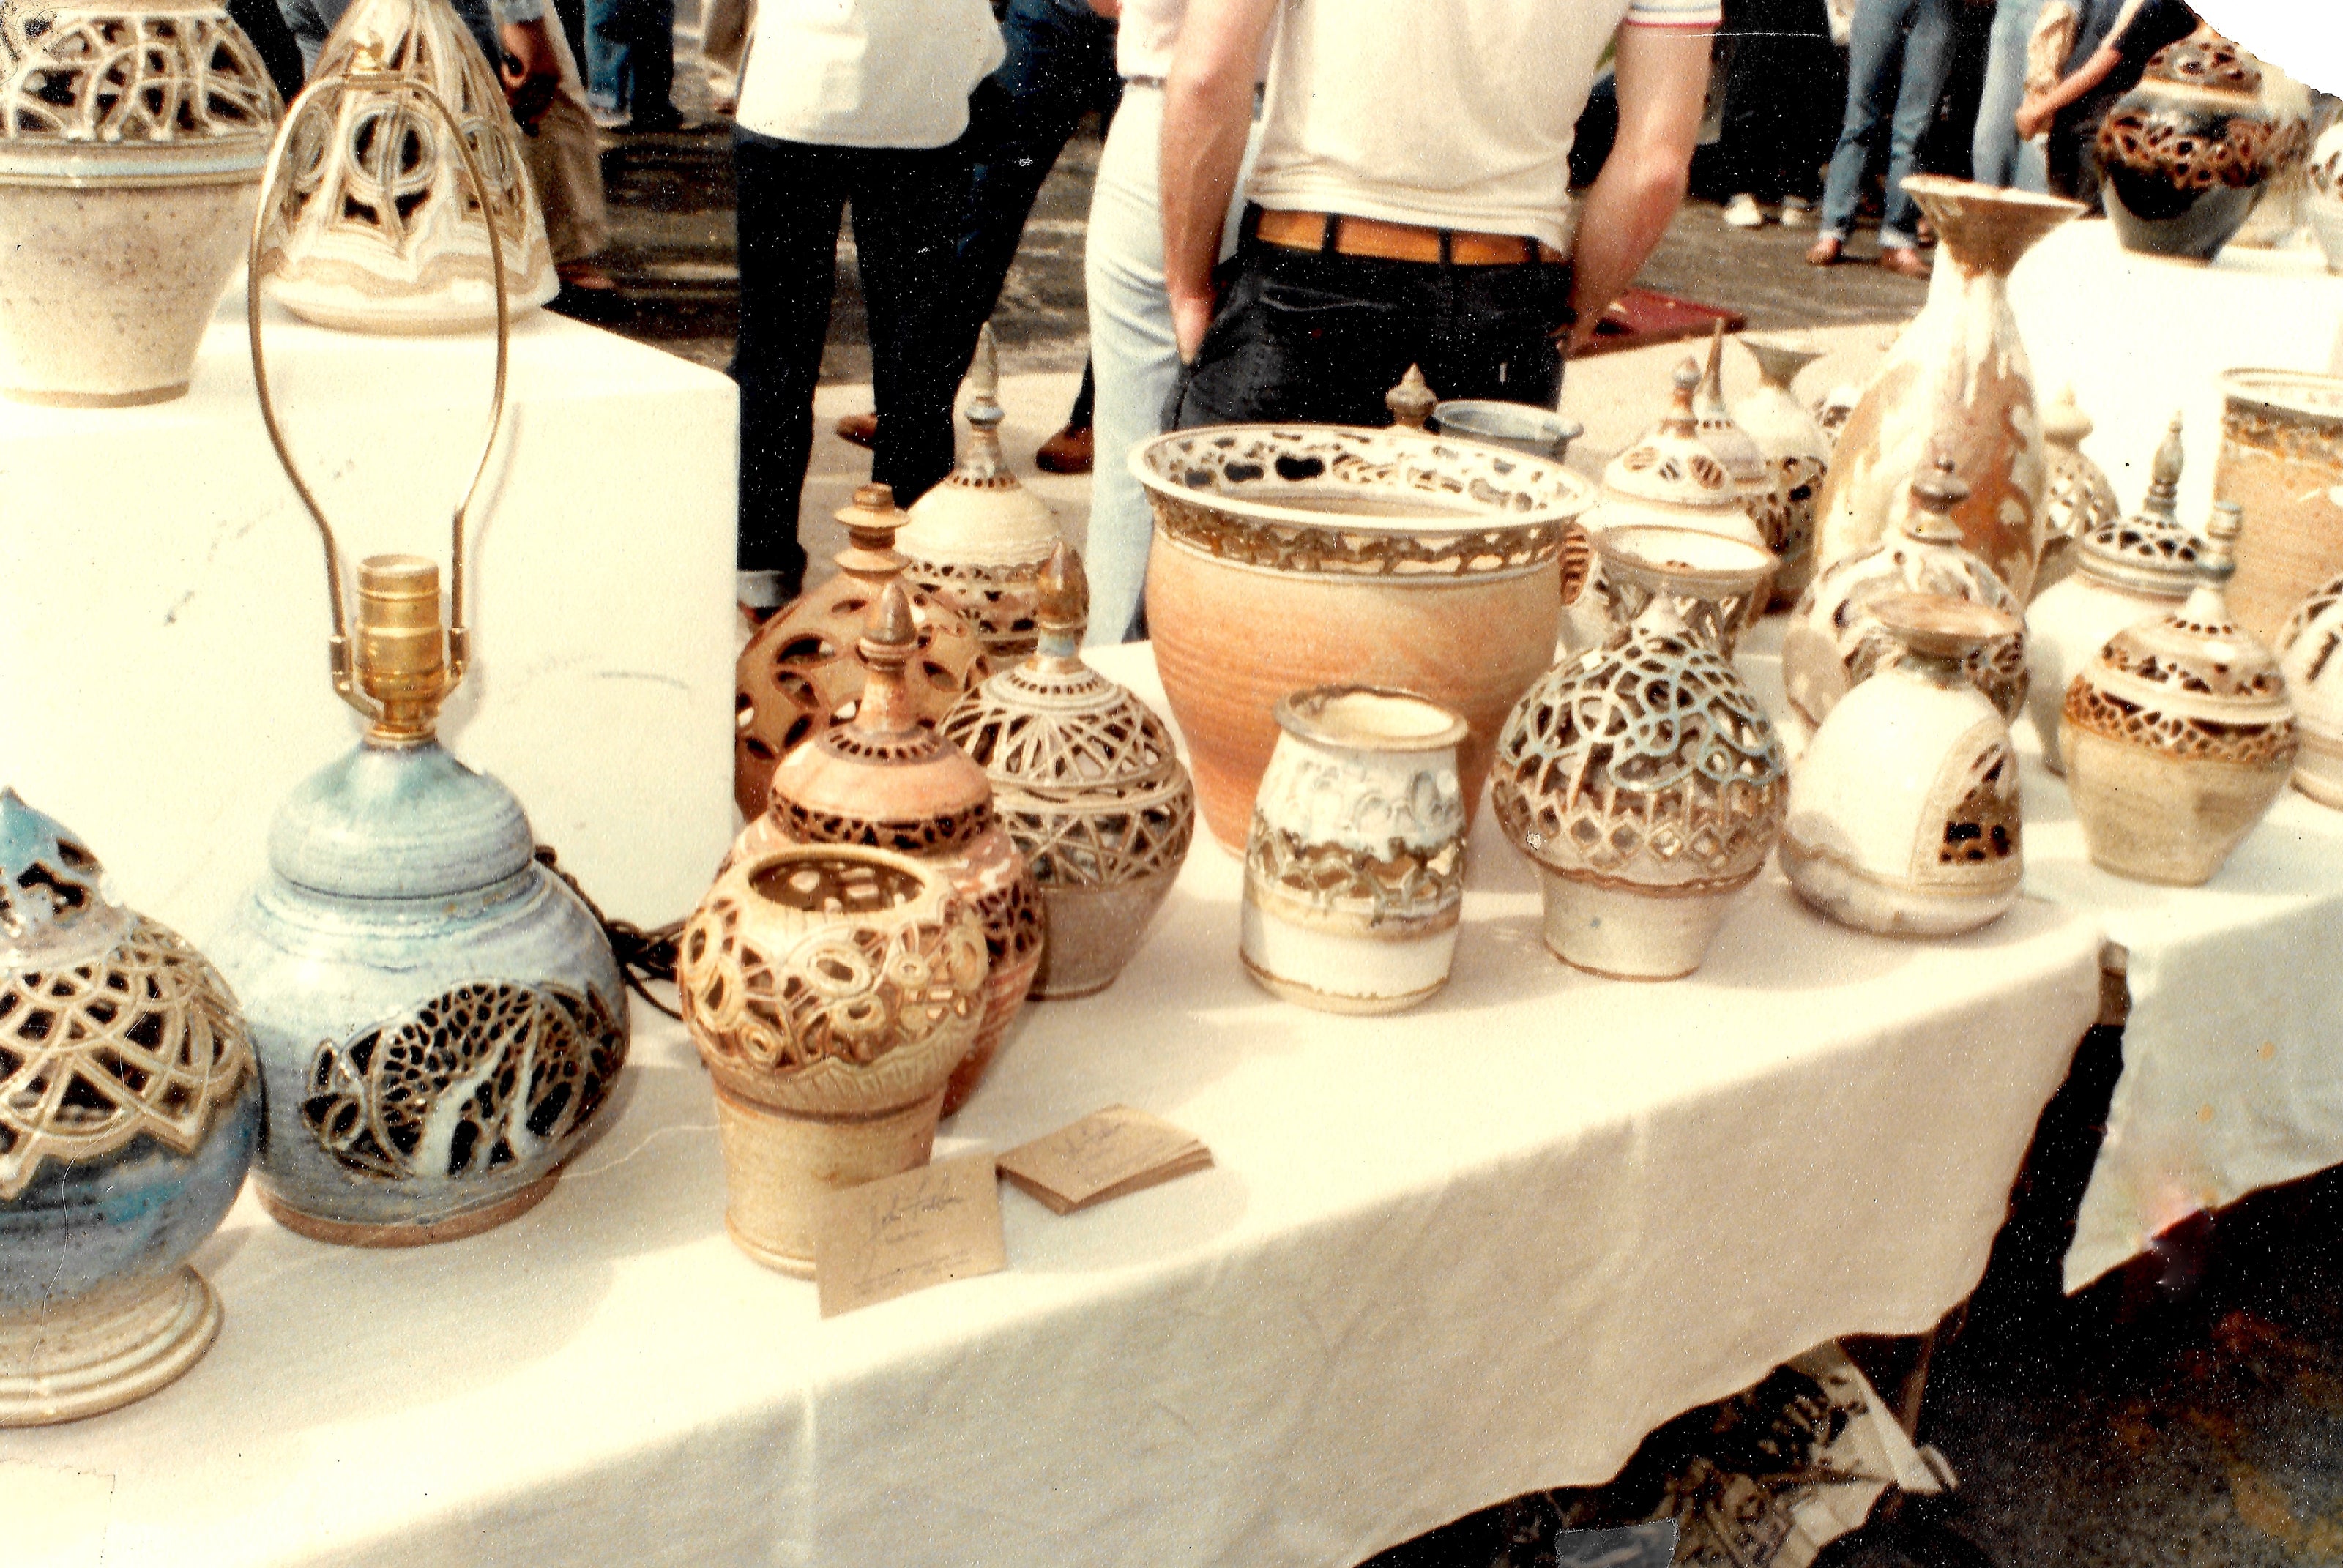 Hand carved ceramic lanterns by John Foelber at an outdooor art festival. Mid 1970's